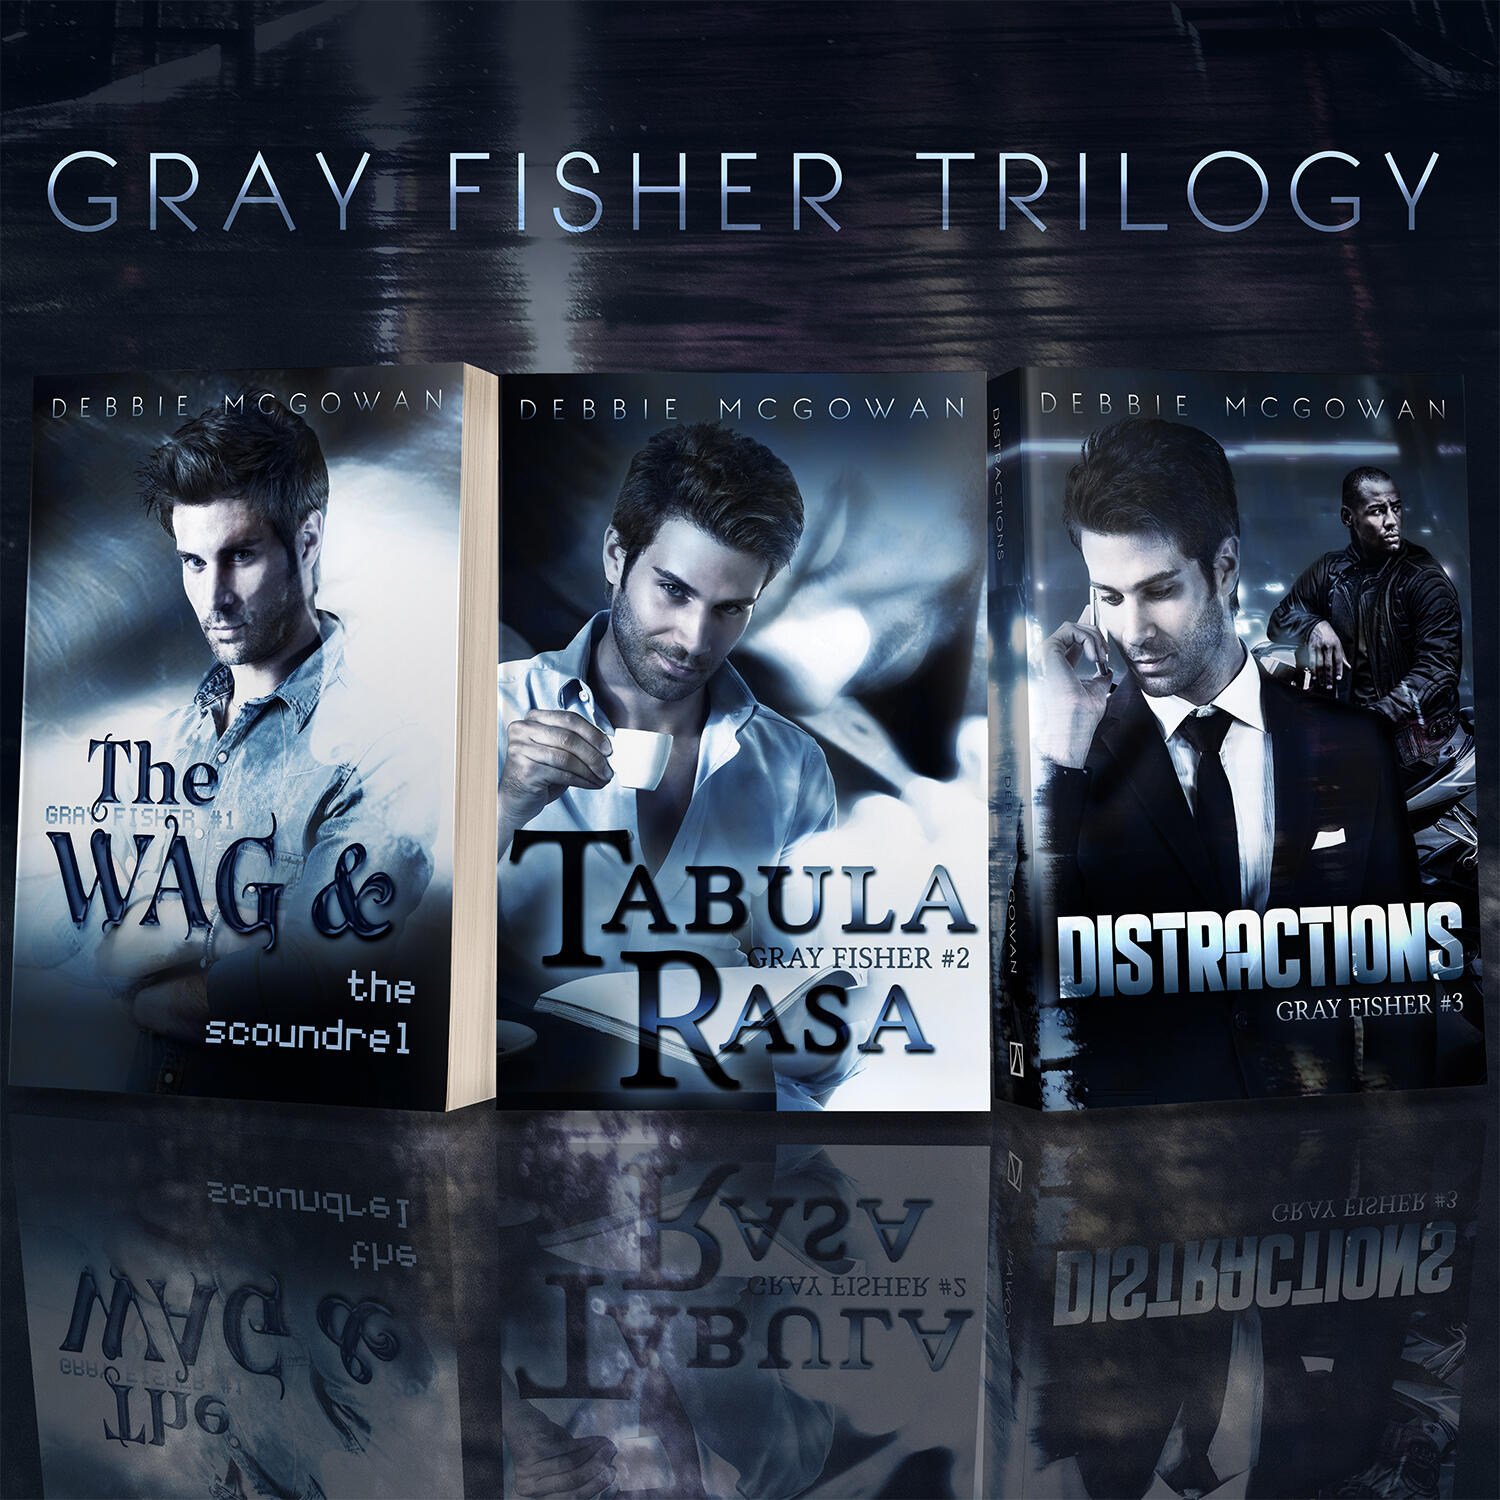 Gray Fisher Trilogy Book Covers